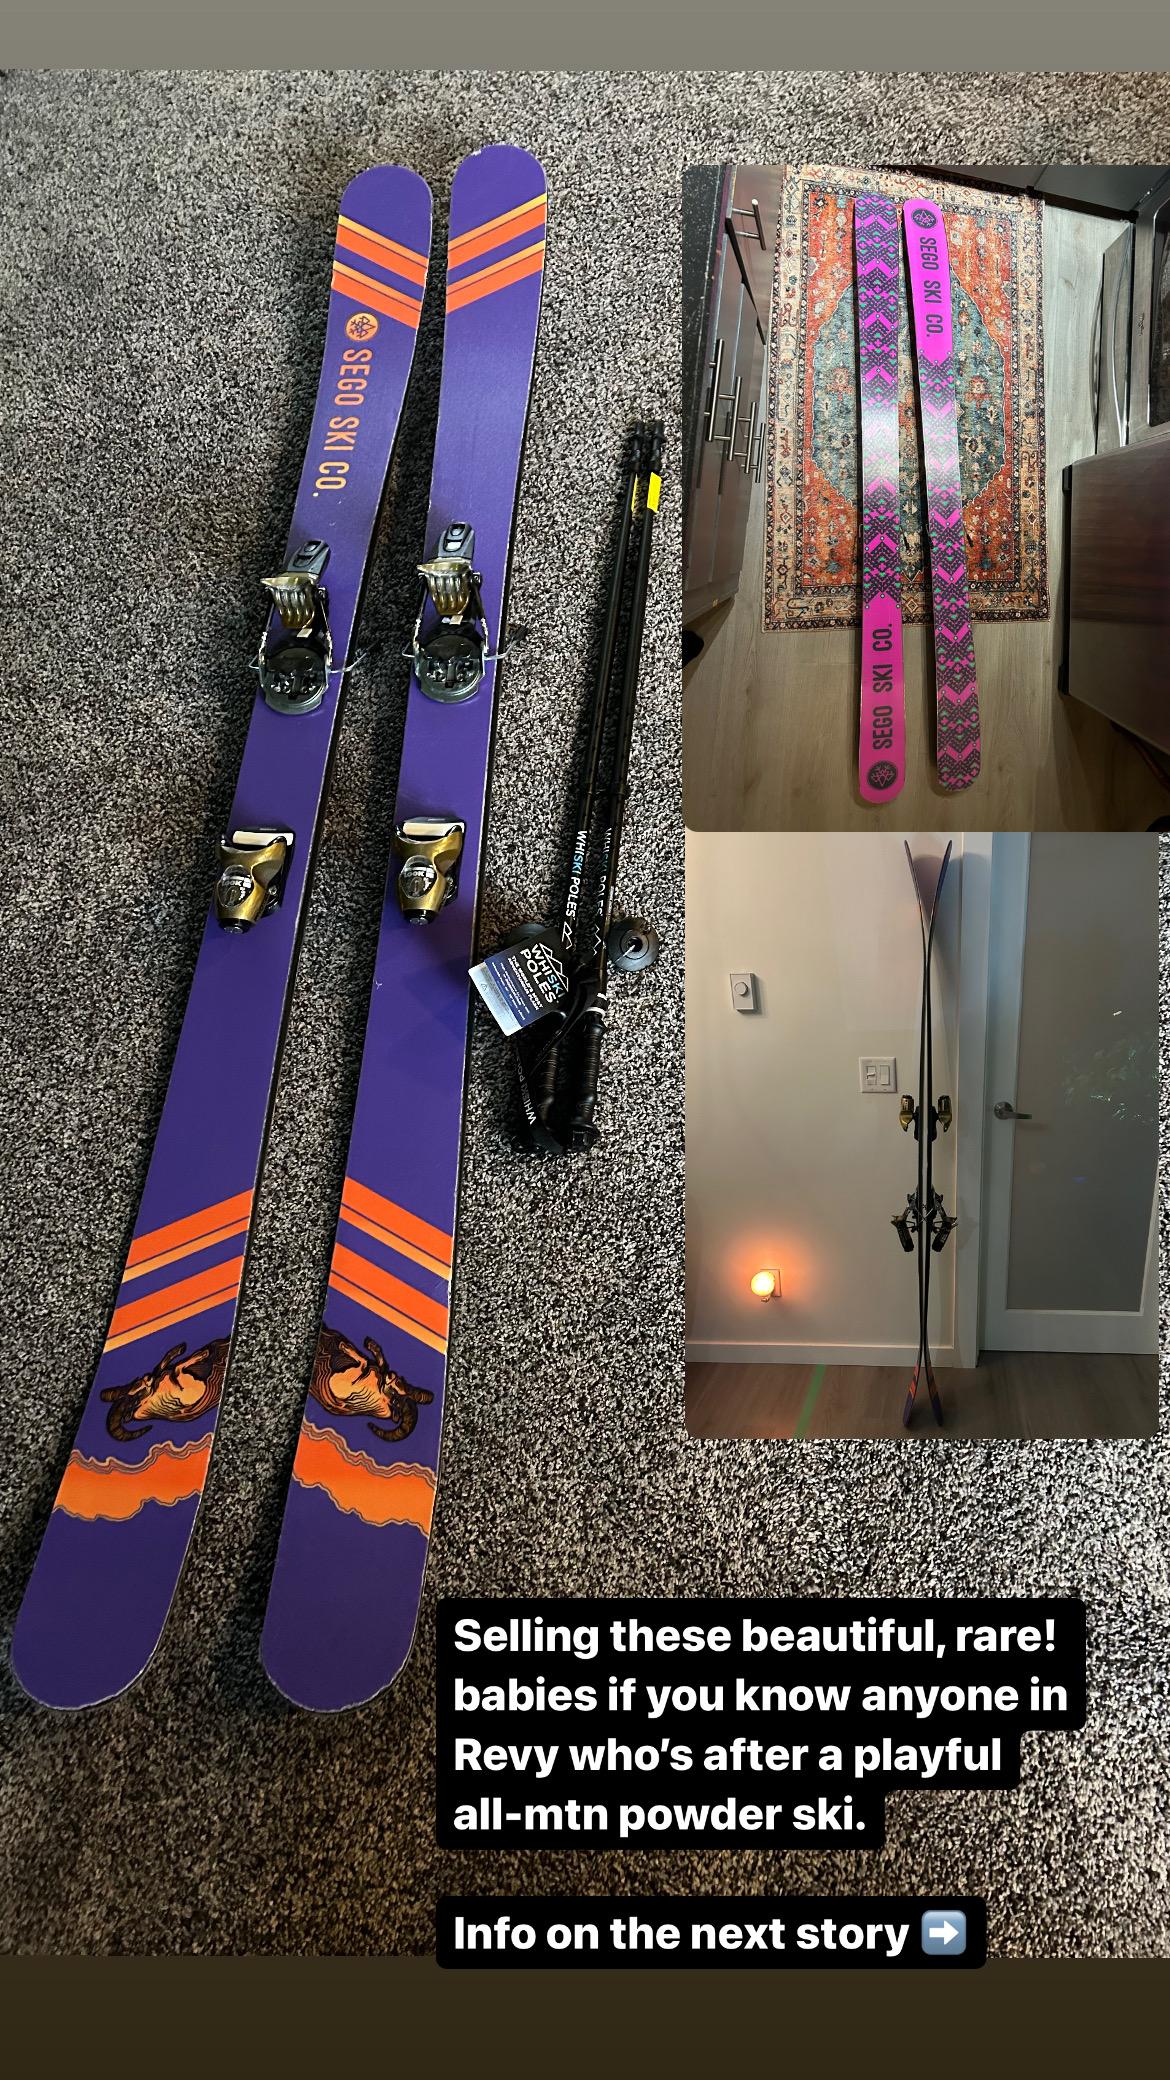 Sego Big Horn 106mm skis 187cm with Look Pivot 15 bindings for 27.5 boot